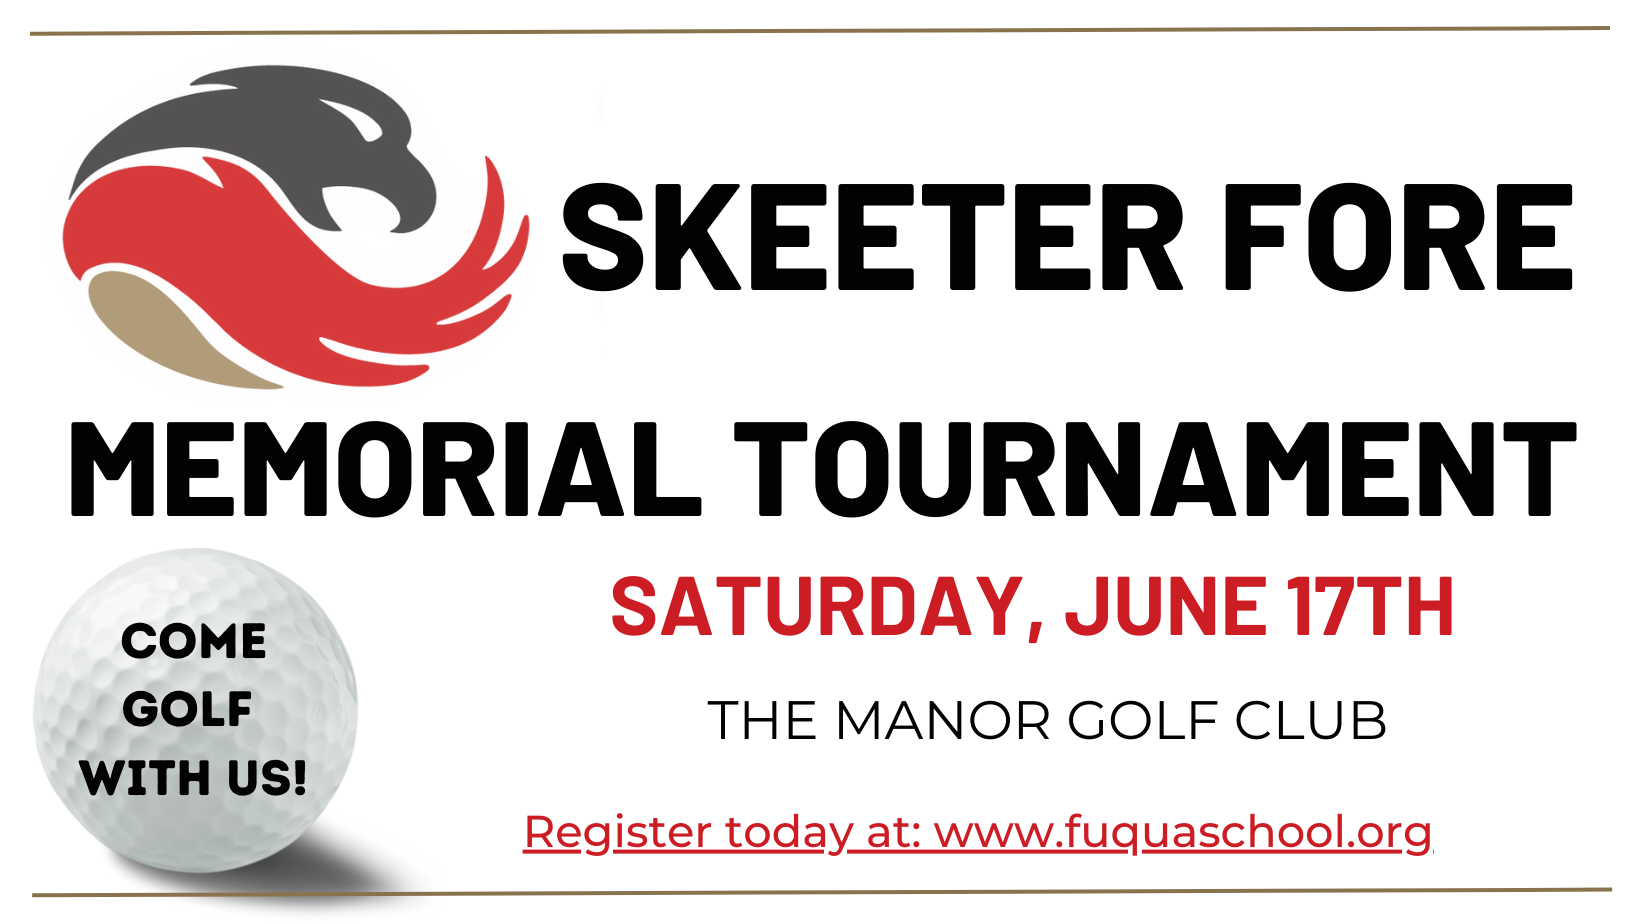 Skeeter Fore Memorial Tournament - Saturday, June 17th The Manor Golf Club. Come Golf With Us! 